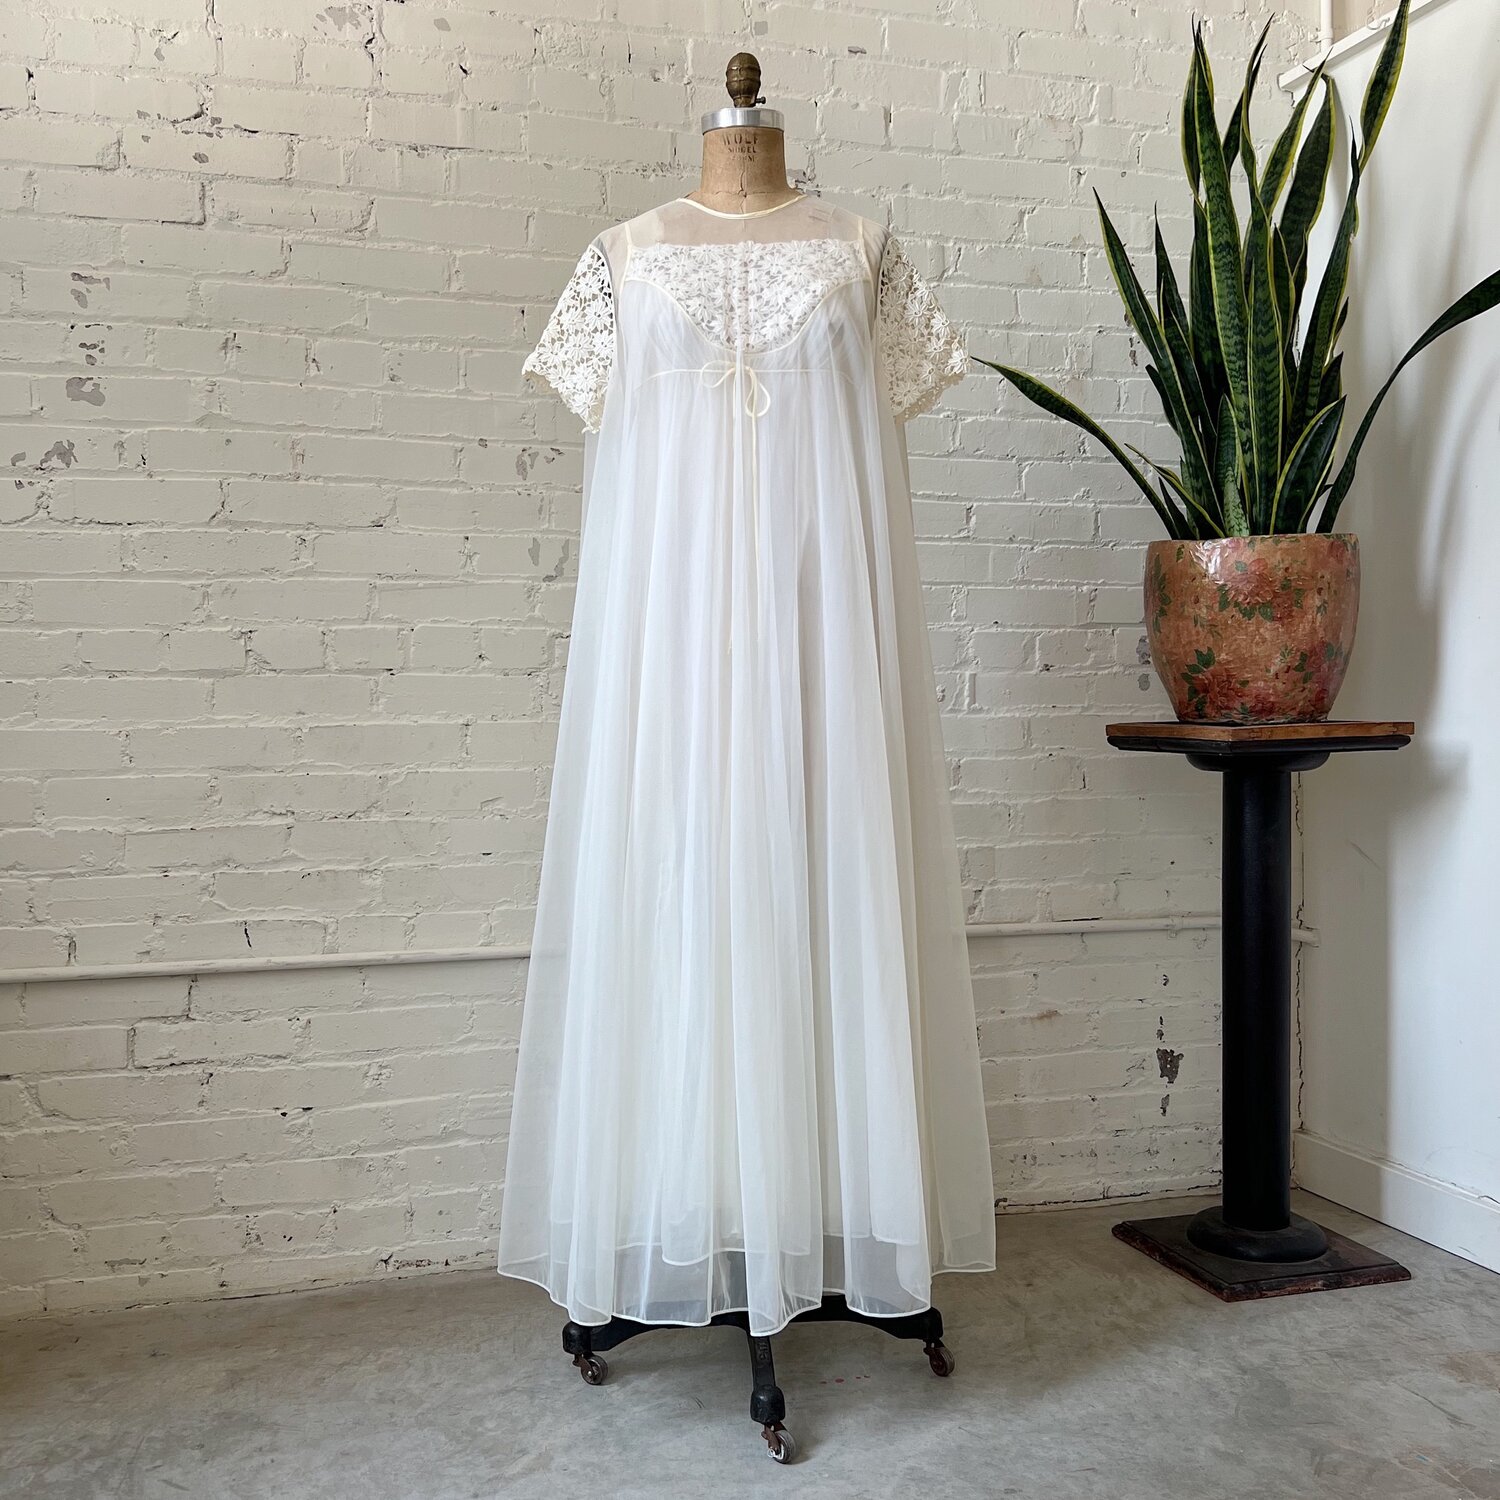 Sheer Nightgown & Overlay Gown w/Lace Sleeves Peignoir Set, Size